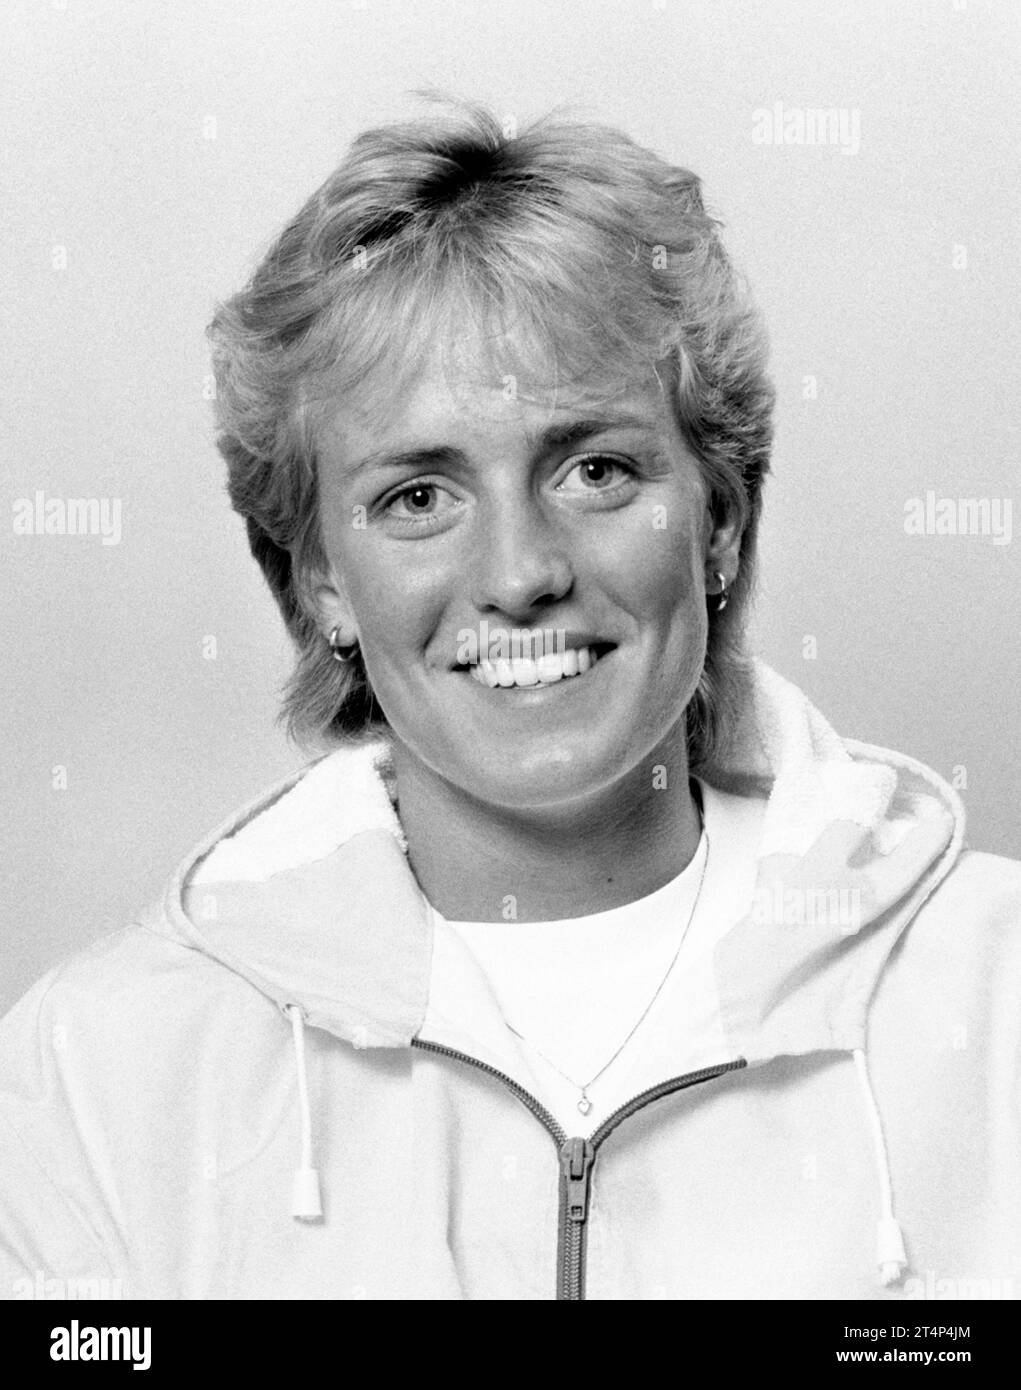 GUNILLA ANDRÉN Swedish athlete in Sweden National athletics team  middle distance runner Stock Photo